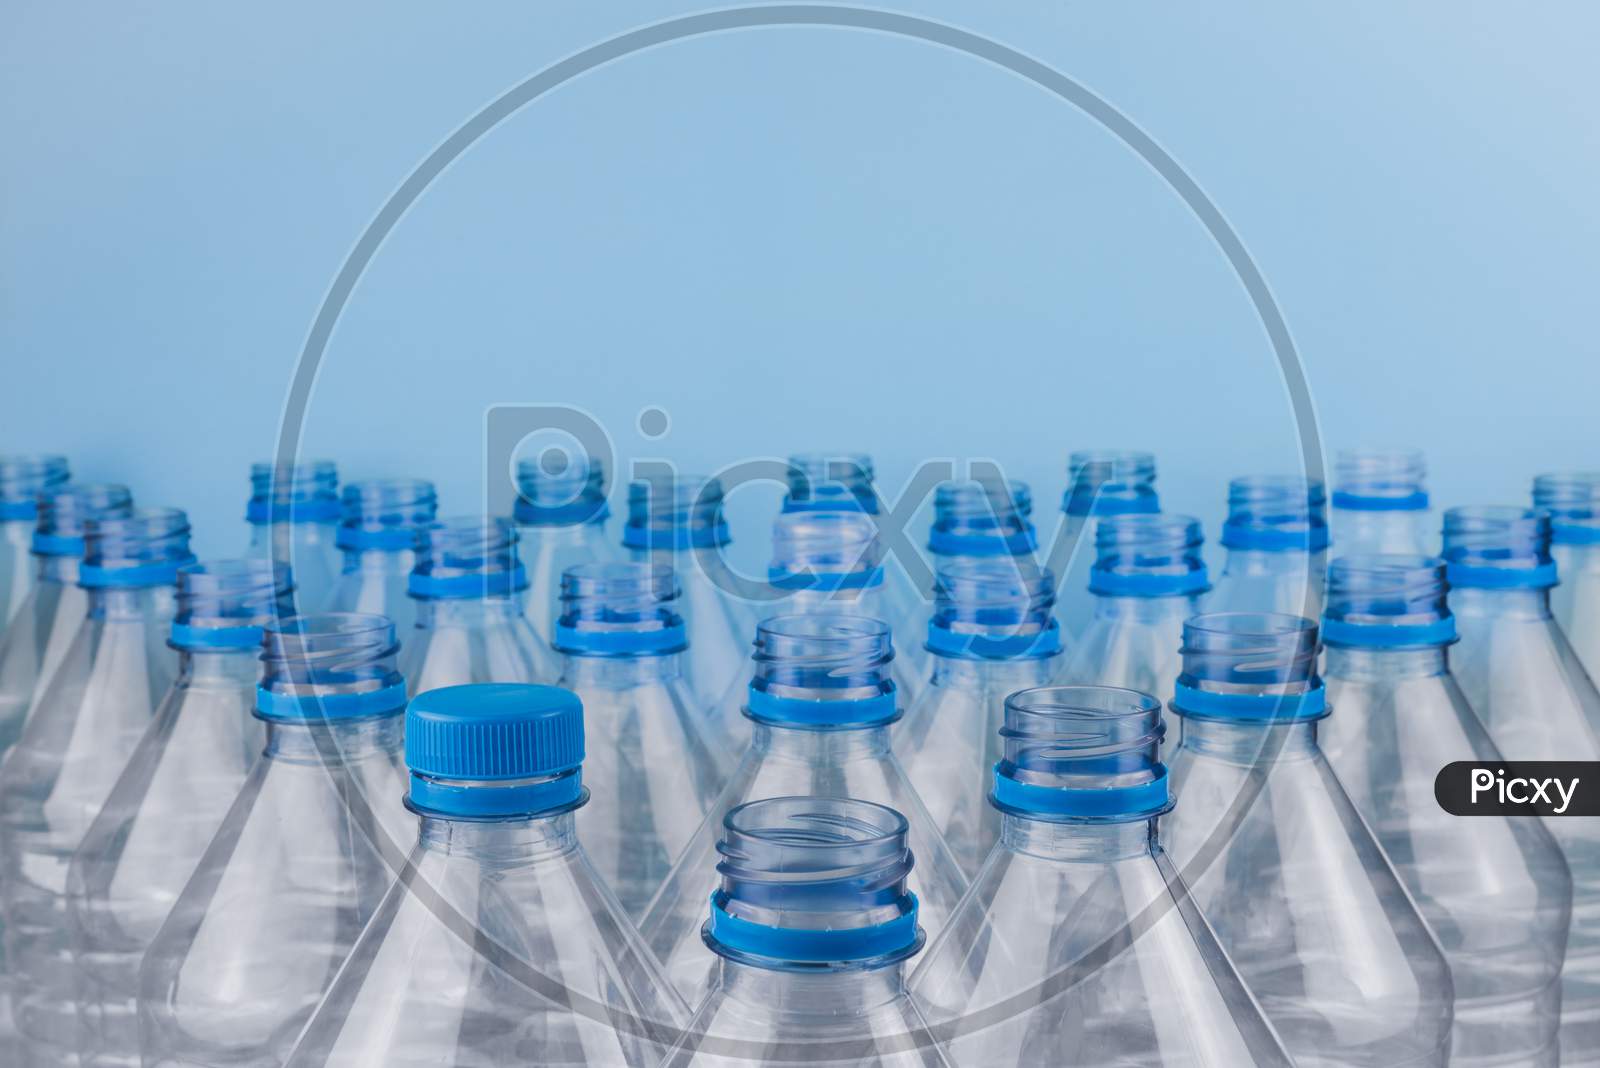 Empty Clear Plastic Bottles With Caps Stacked On A Blue Background. Recycling And Environment Concept